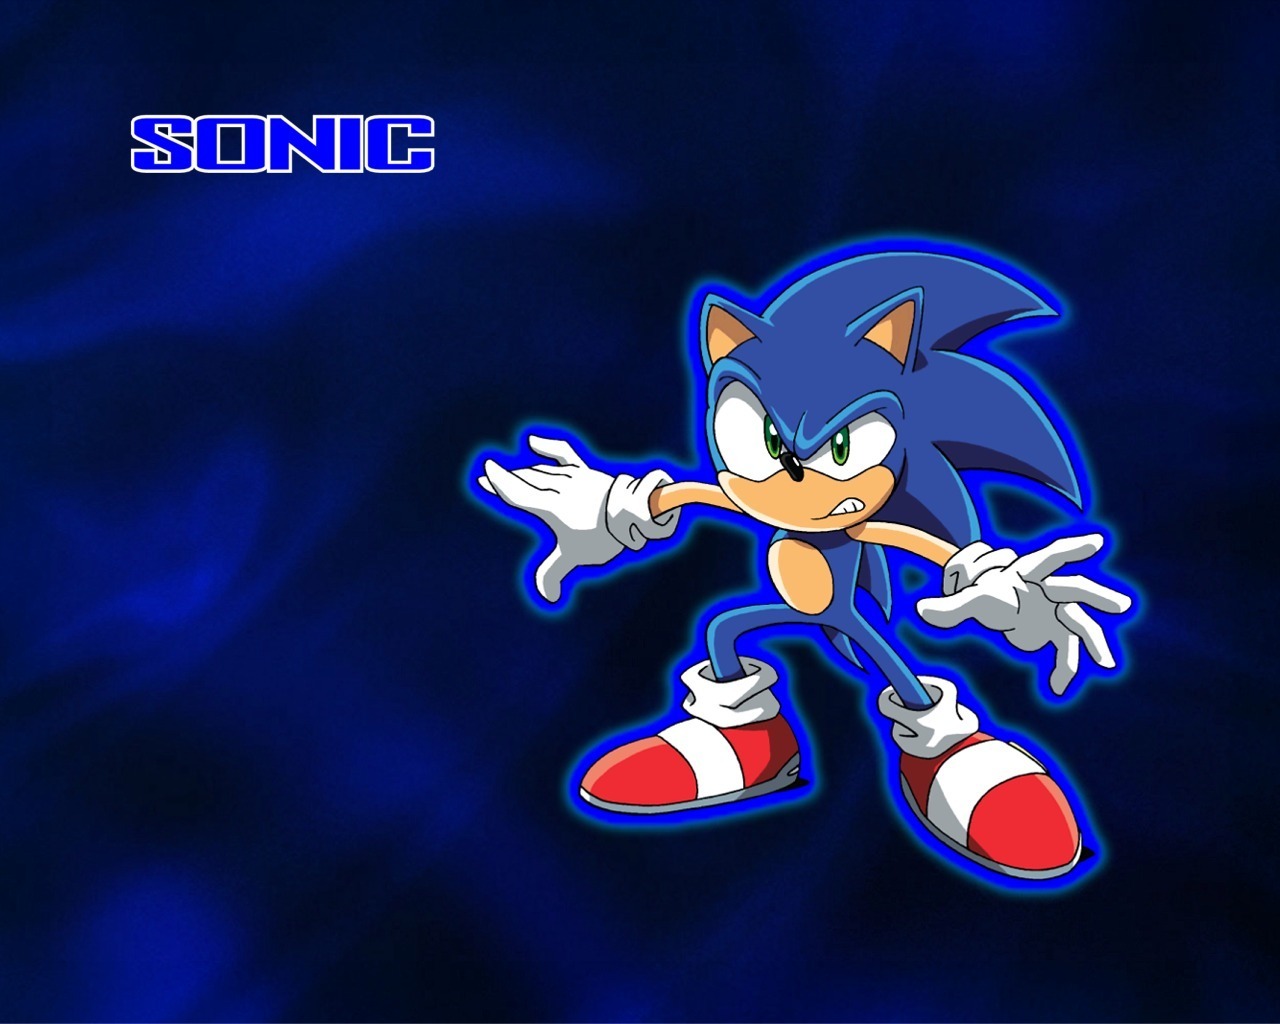 Cool Sonic The Hedgehog Wallpaper Images amp Pictures   Becuo